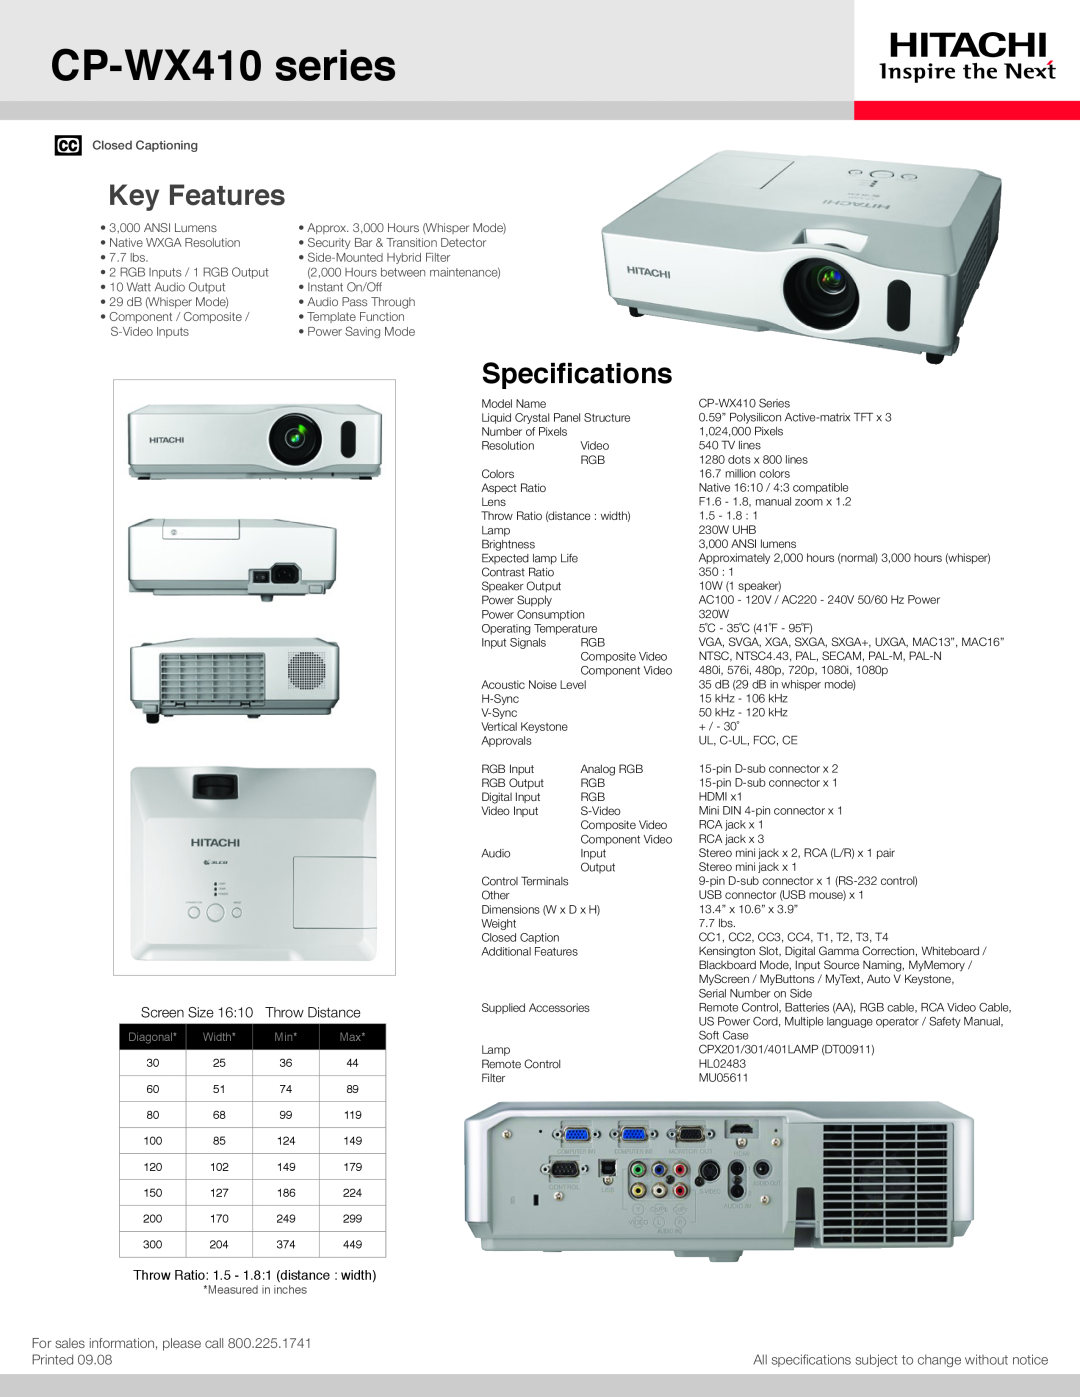 Hitachi specifications CP-WX410series, Key Features, Specifications, Screen Size, Throw Distance, Printed, Diagonal 